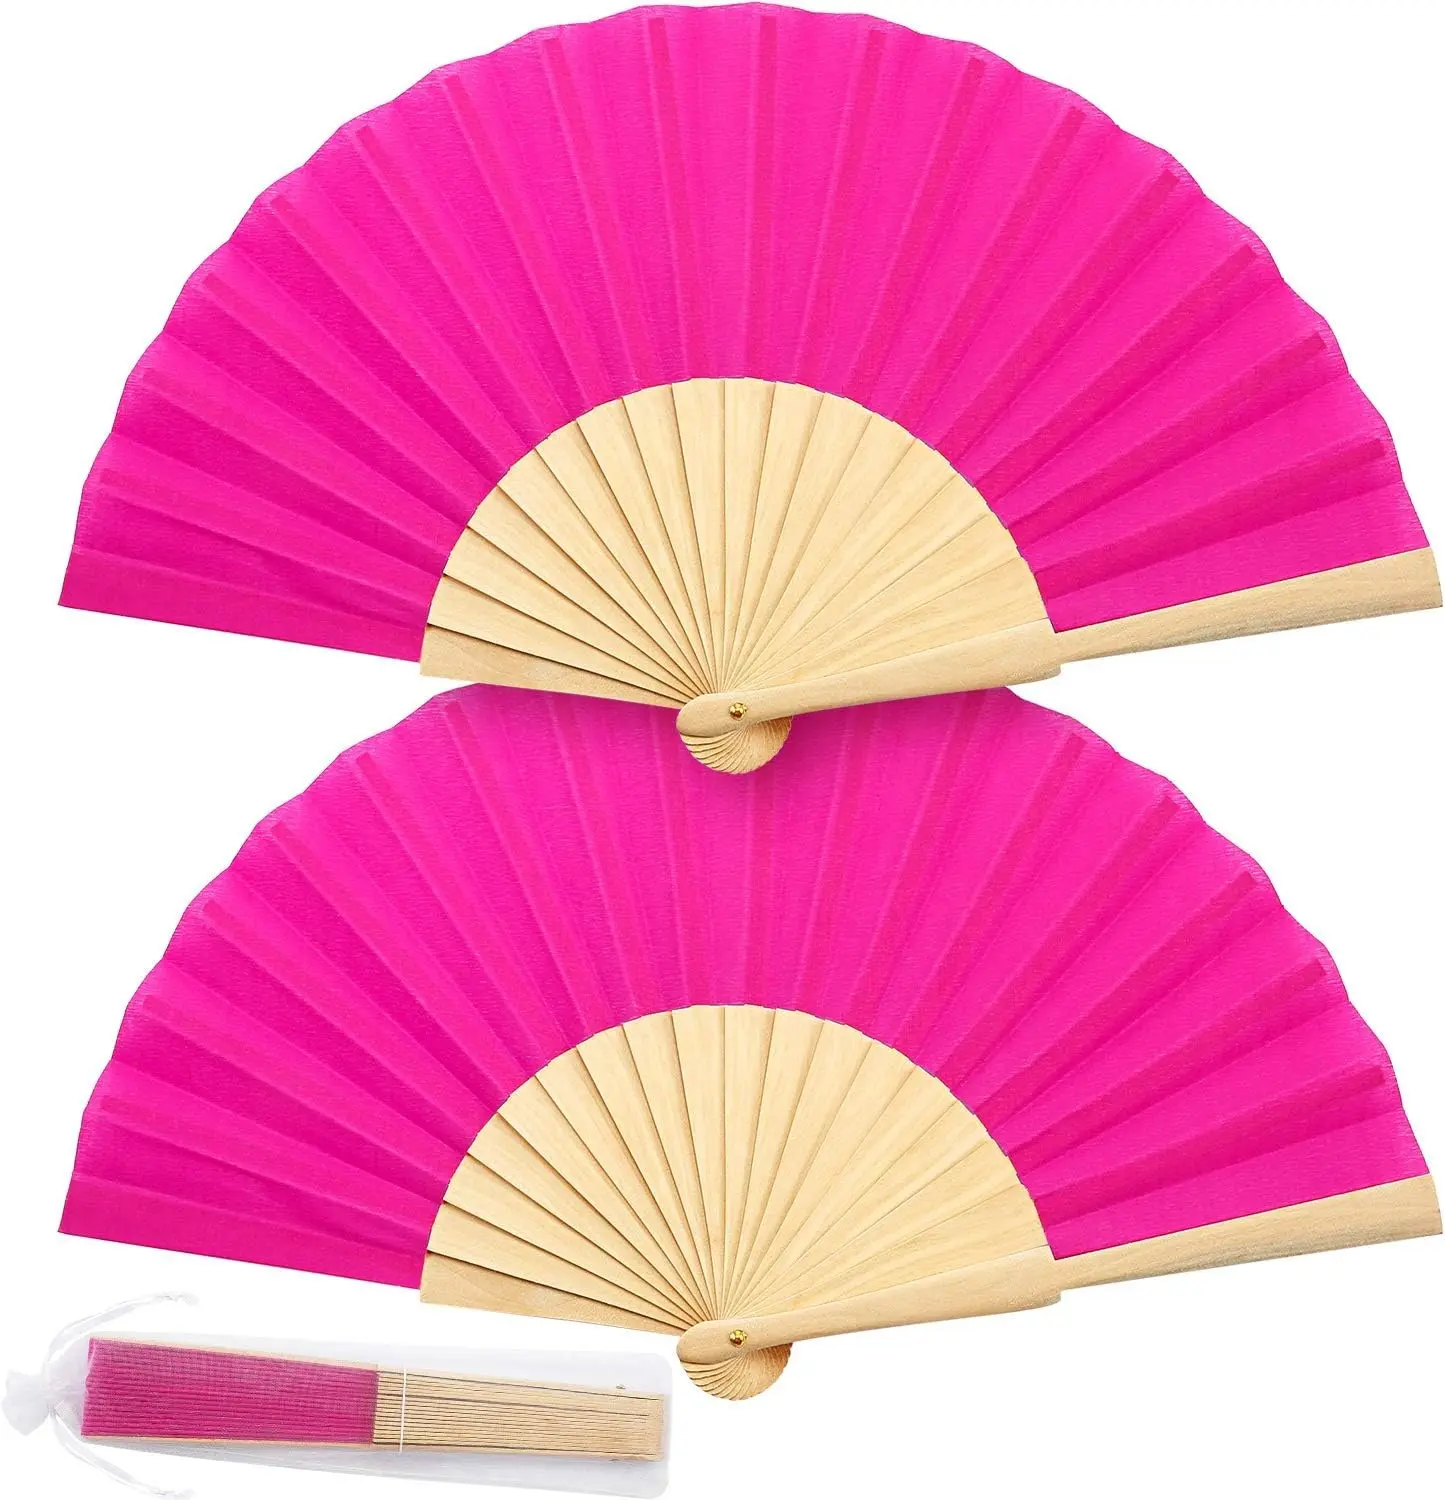 Custom Printing Typical 23cm Cherry Wood Spanish Folding Hand Fans for Wedding Decoration and Party